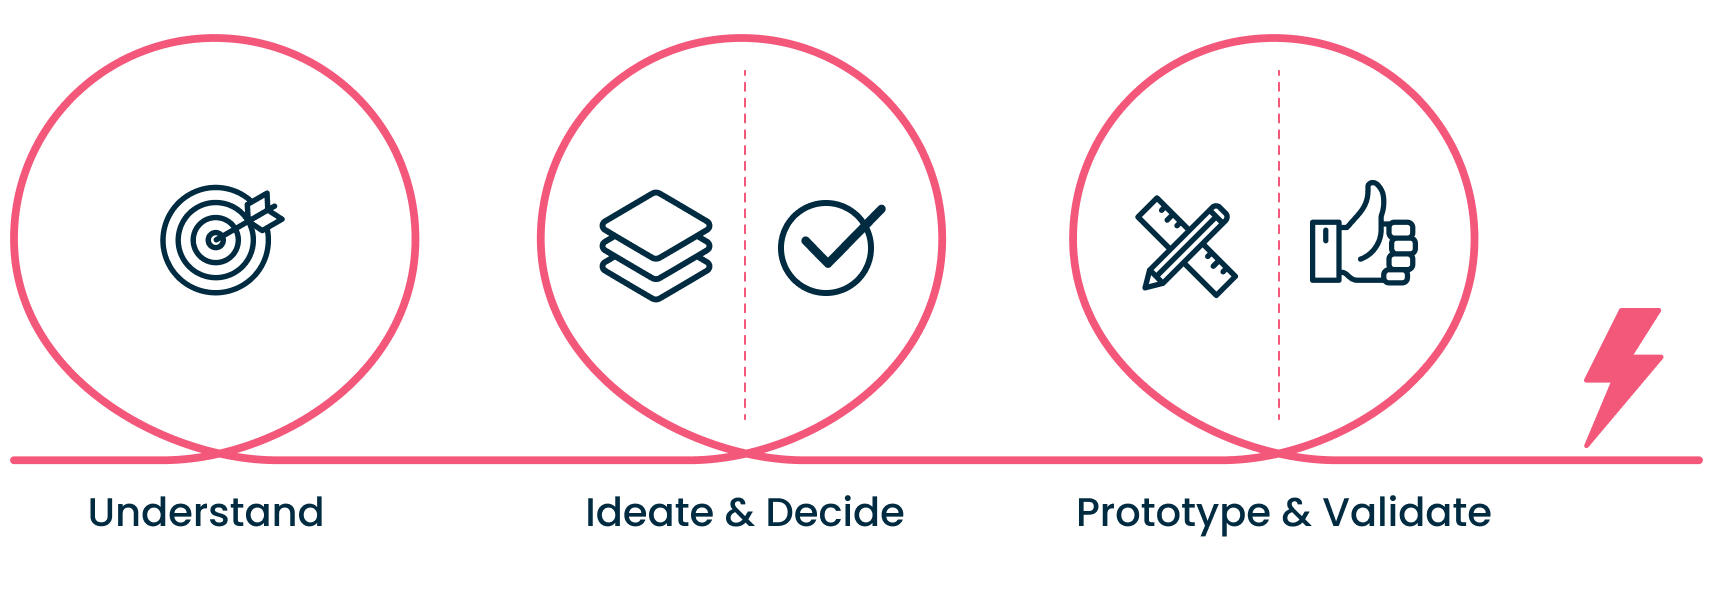 Visual looping path of the design thinking process, moving left to right, starting with Understand, Ideate, Decide, Prototype, and Validate.